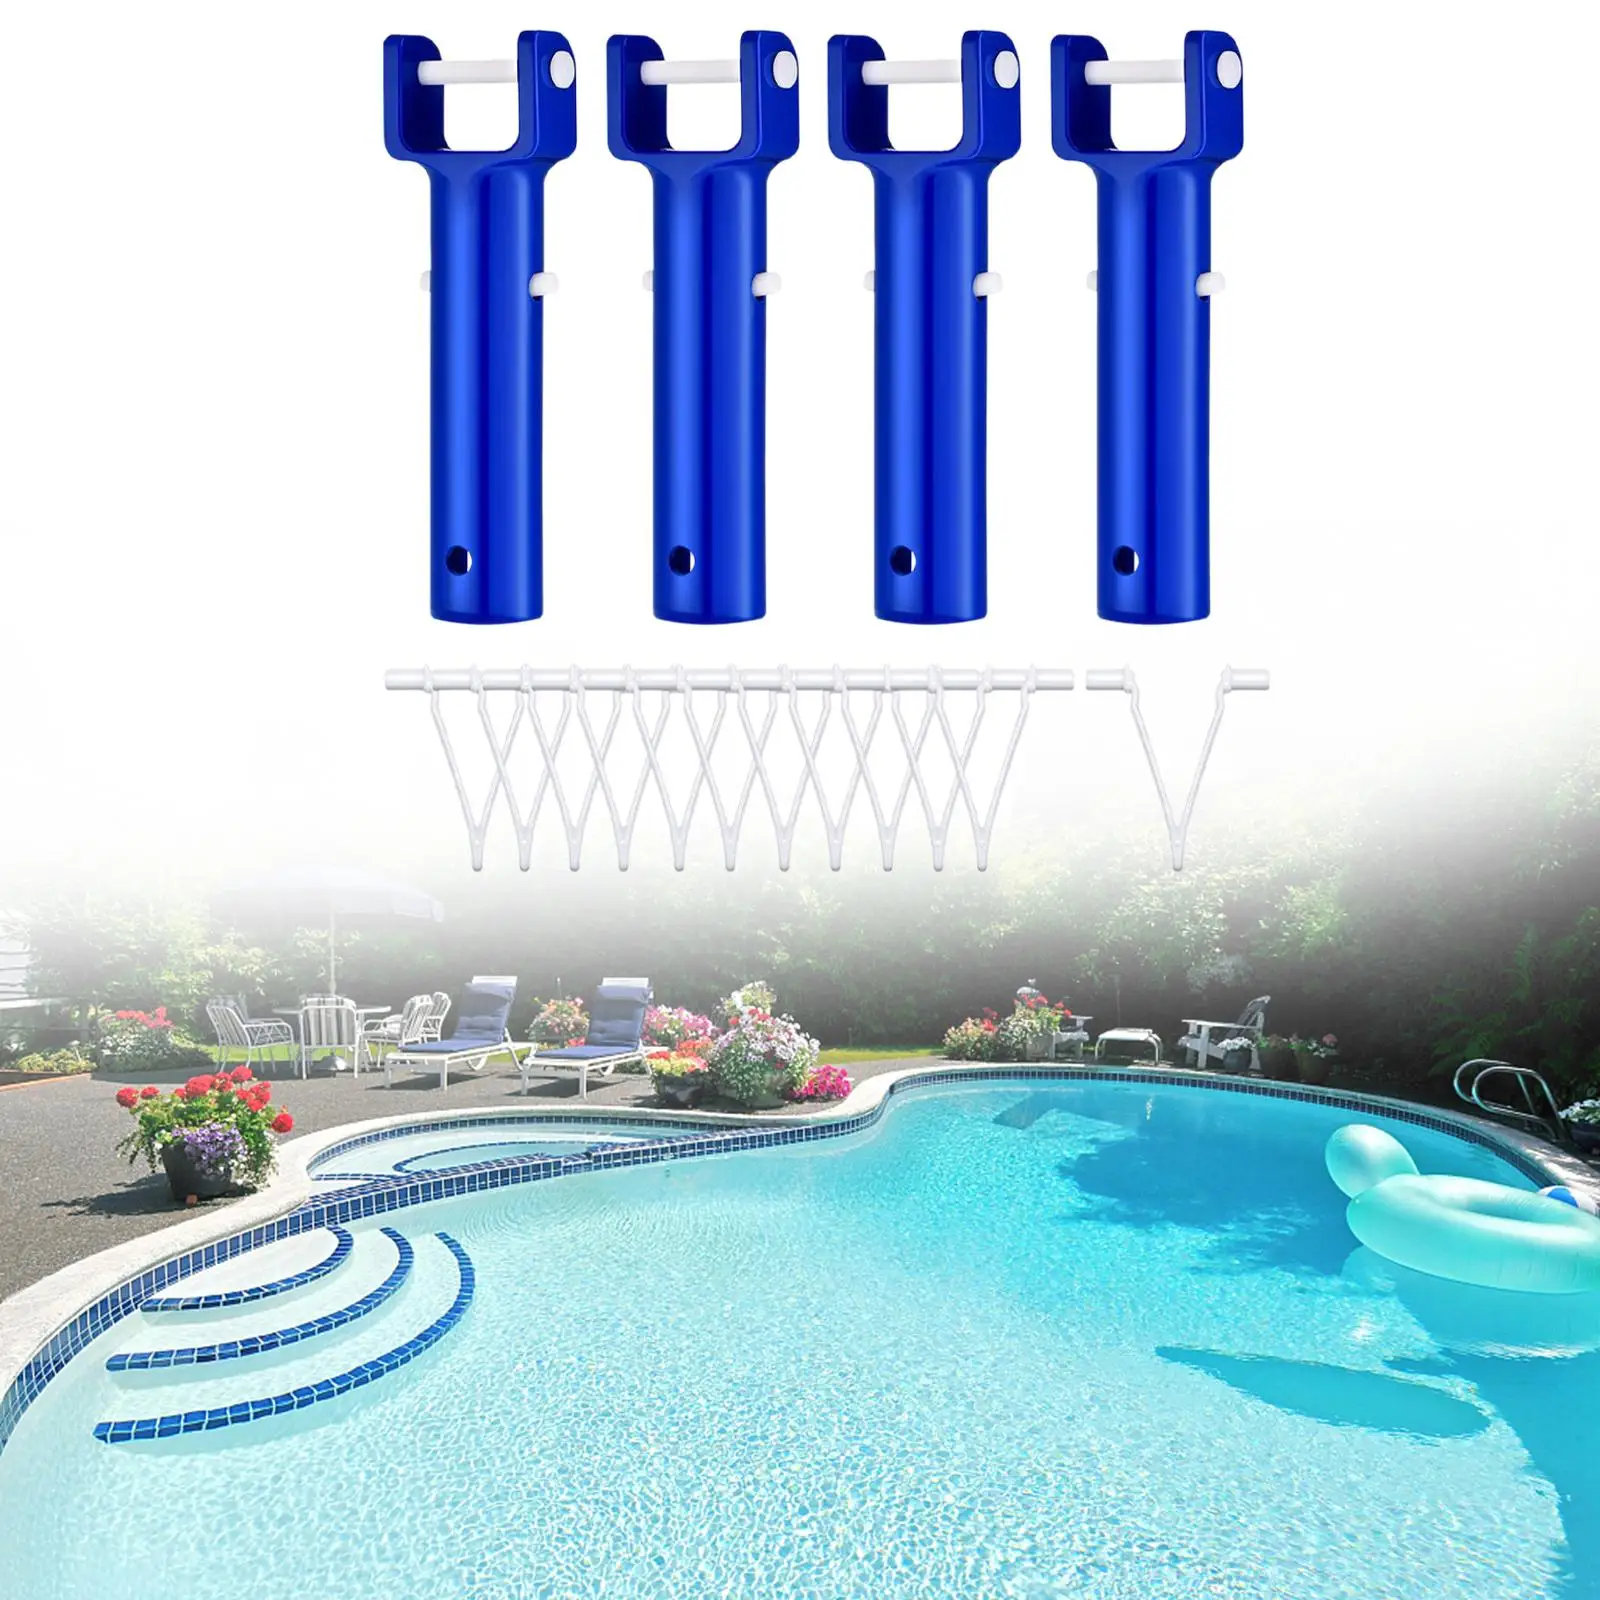 4 Pieces Replacements V Handle with 12Pcs V Clips Fitting Accessory for above Ground Pool Leaf Rakes Pool Vacuums Skimmer